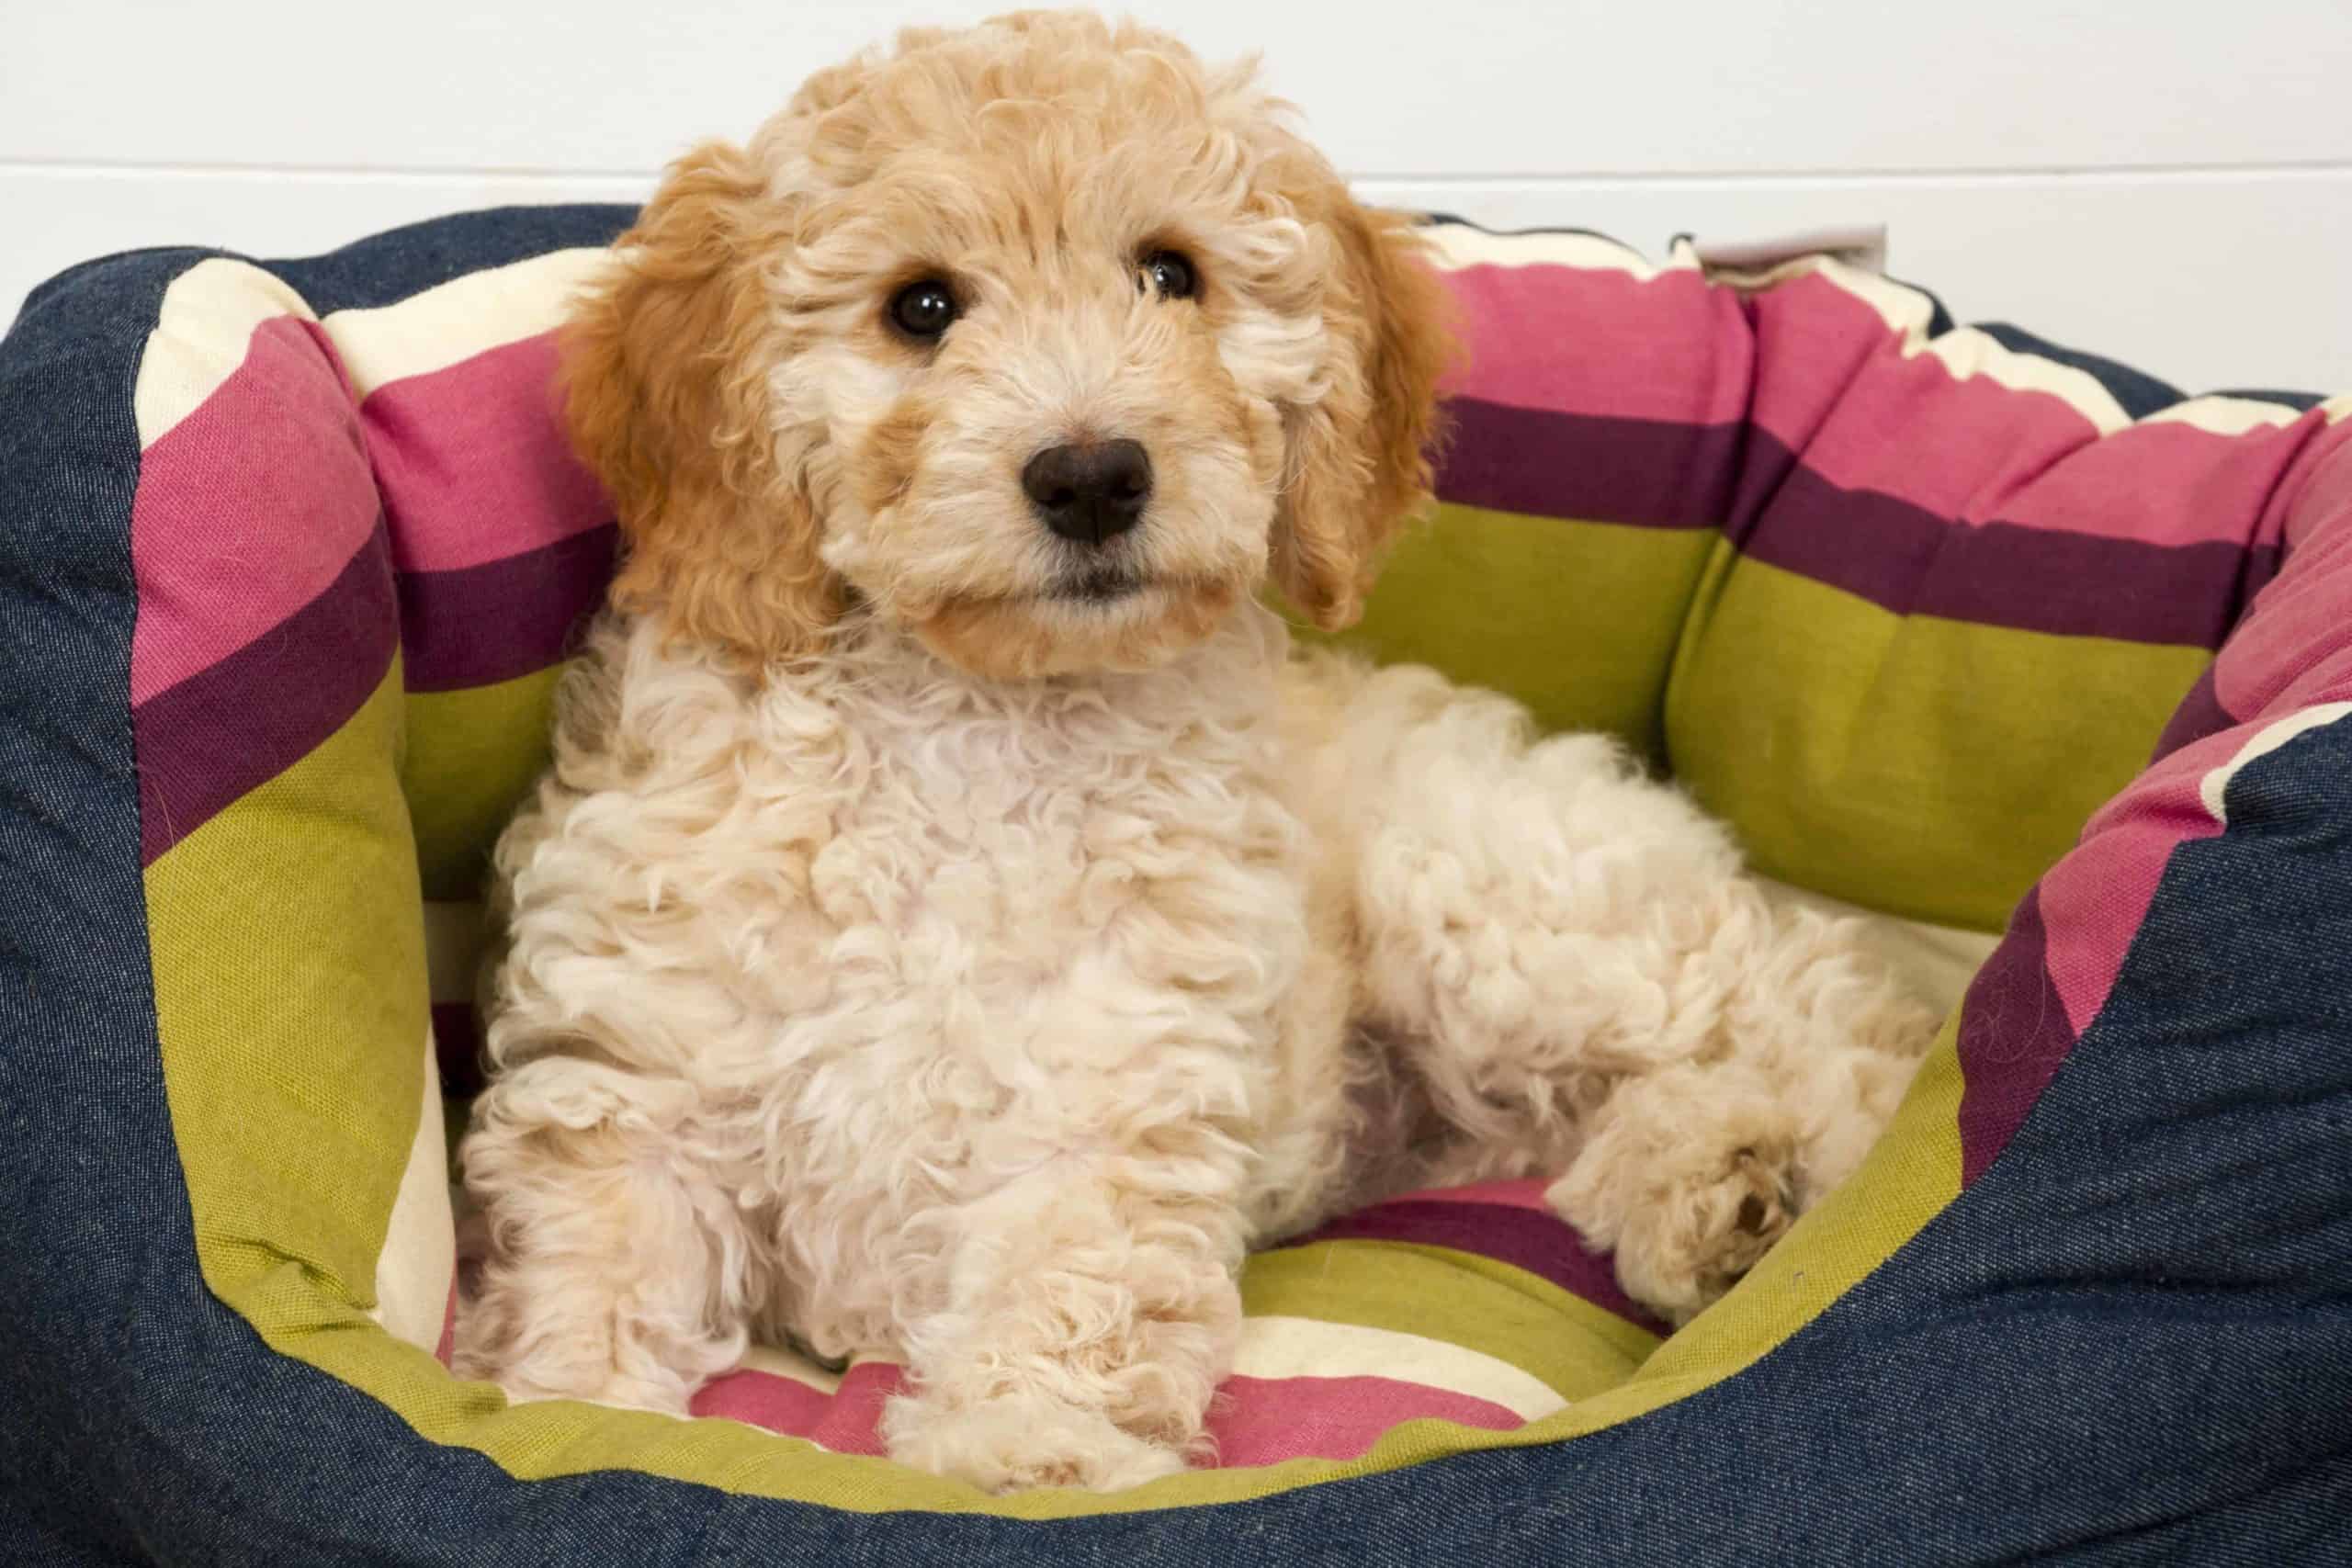 Cockapoo rests in dog bed. Crossbreeds make great family pets. Consider an affectionate cockapoo.